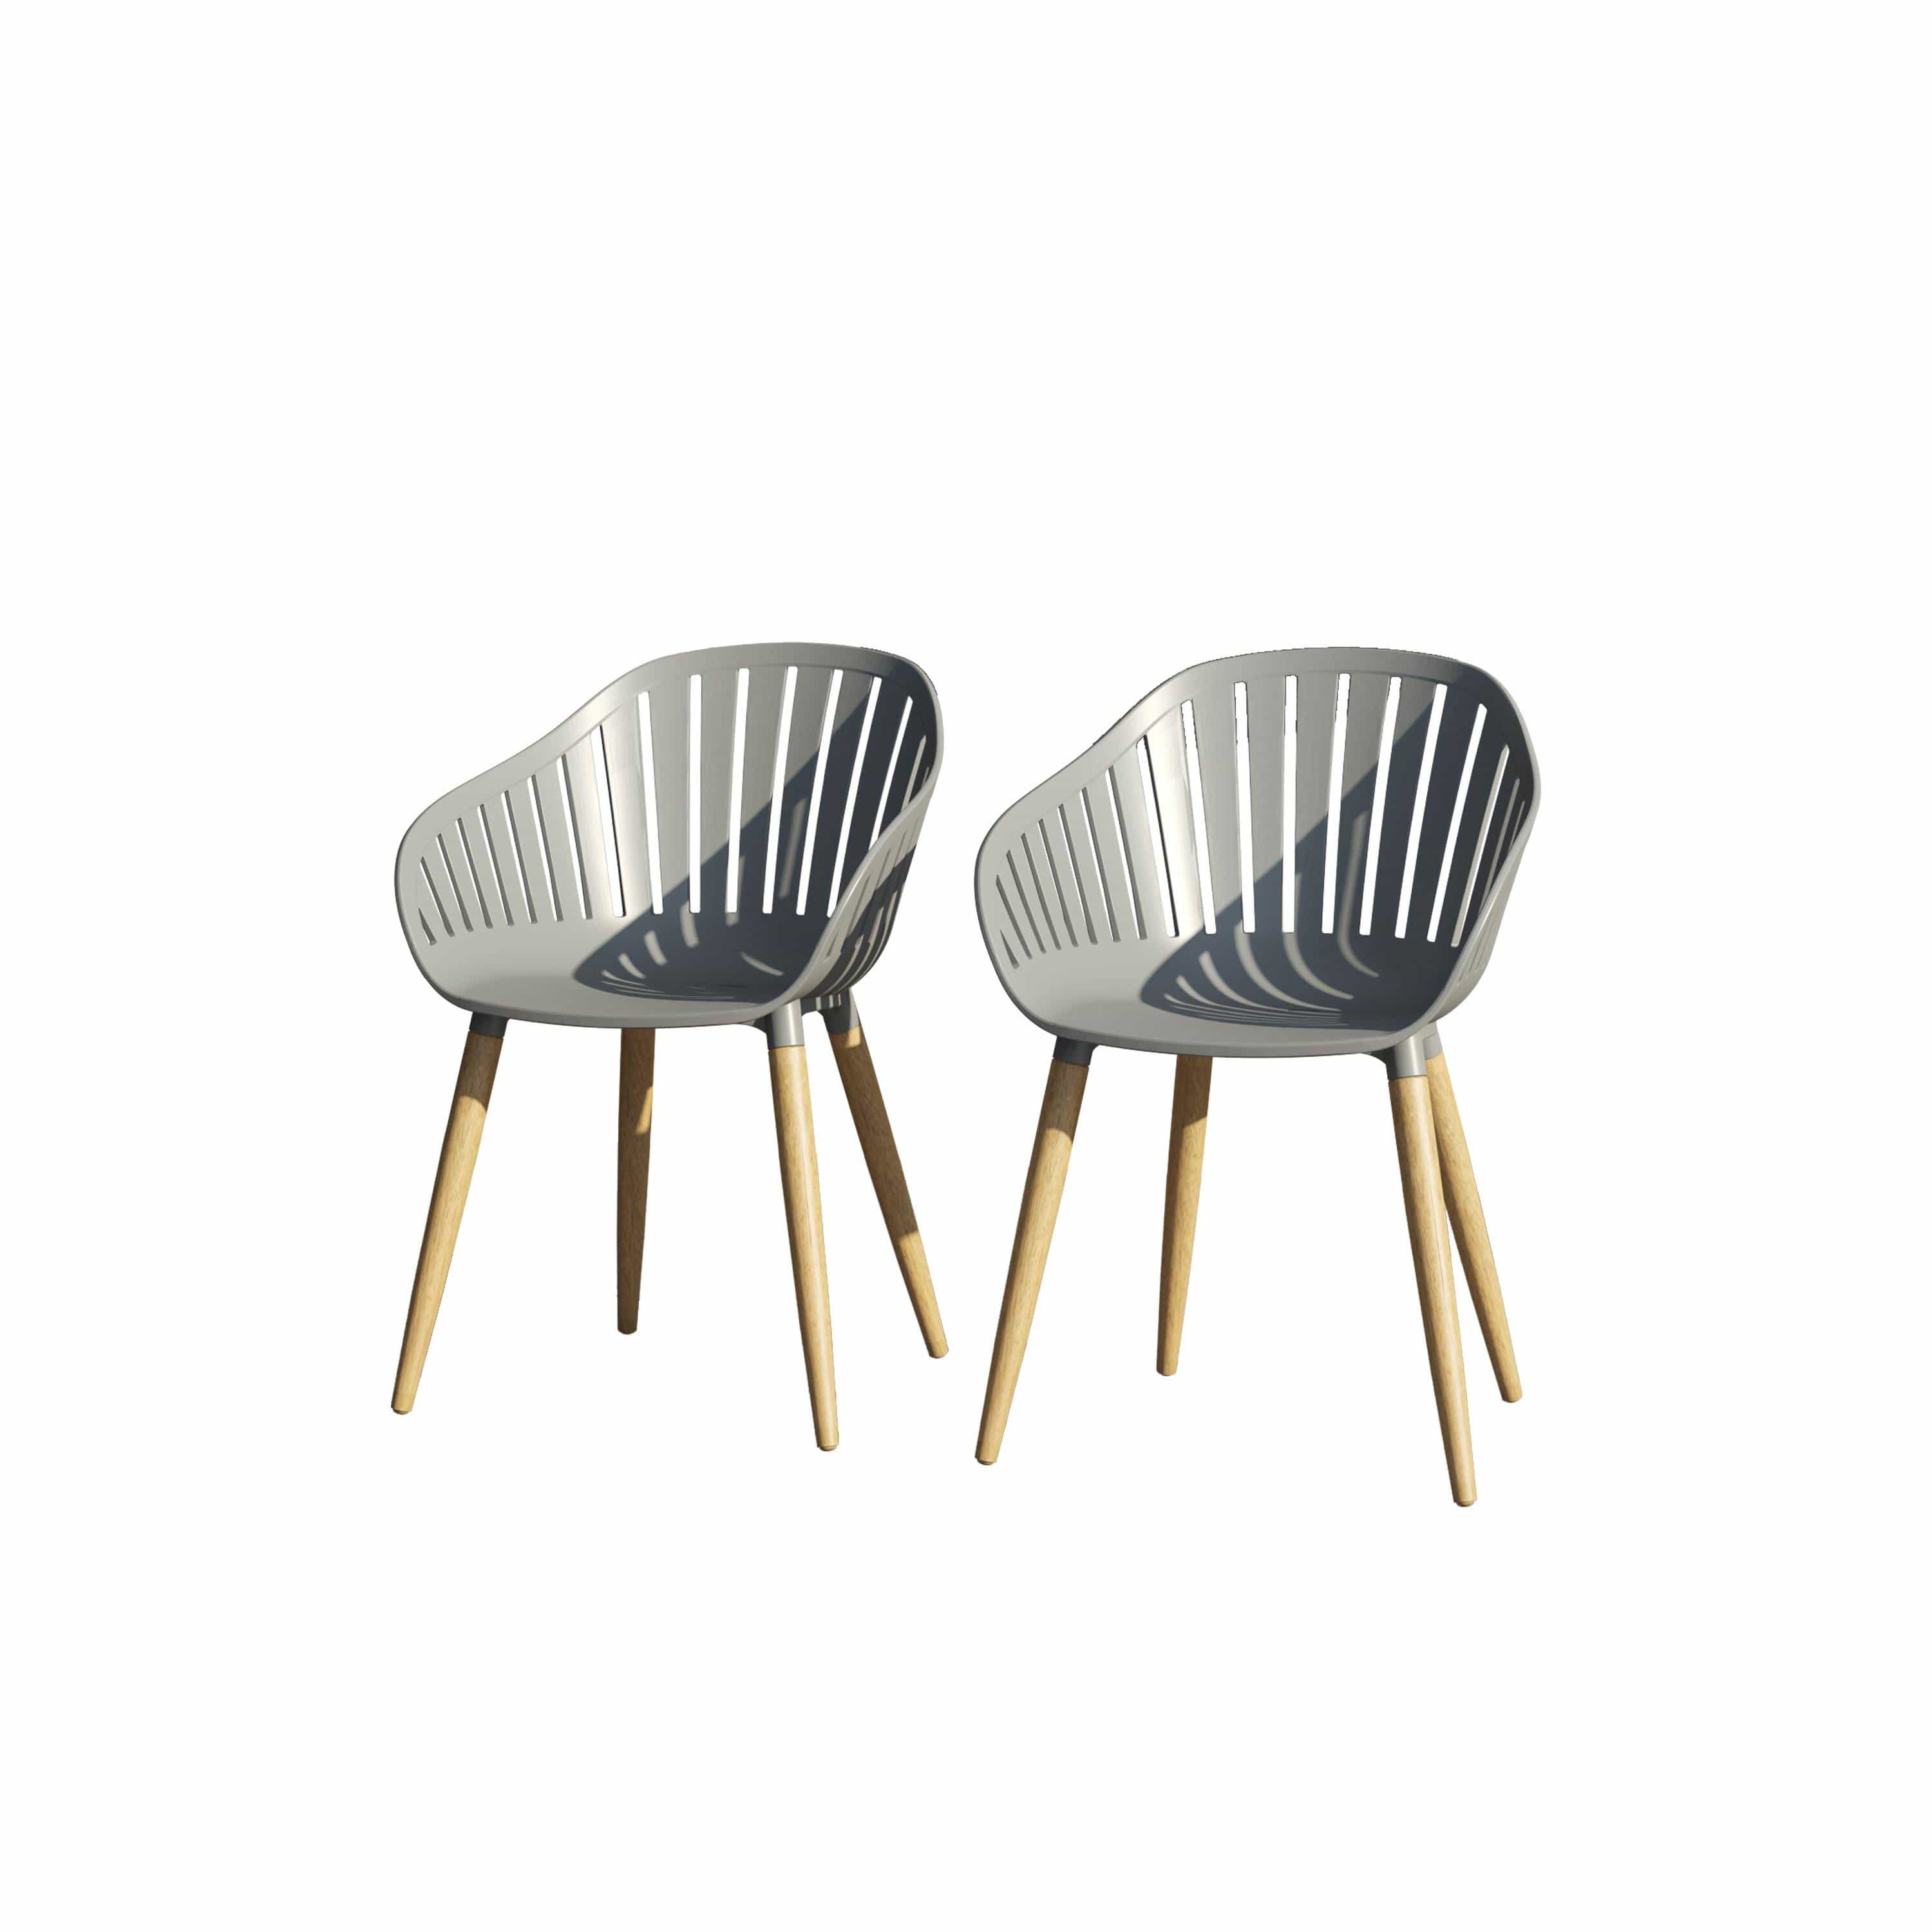 Amazonia Patio Chairs Amazonia 2-Piece Chairs Set | Teak Finish | Ideal for Outdoors and Indoors